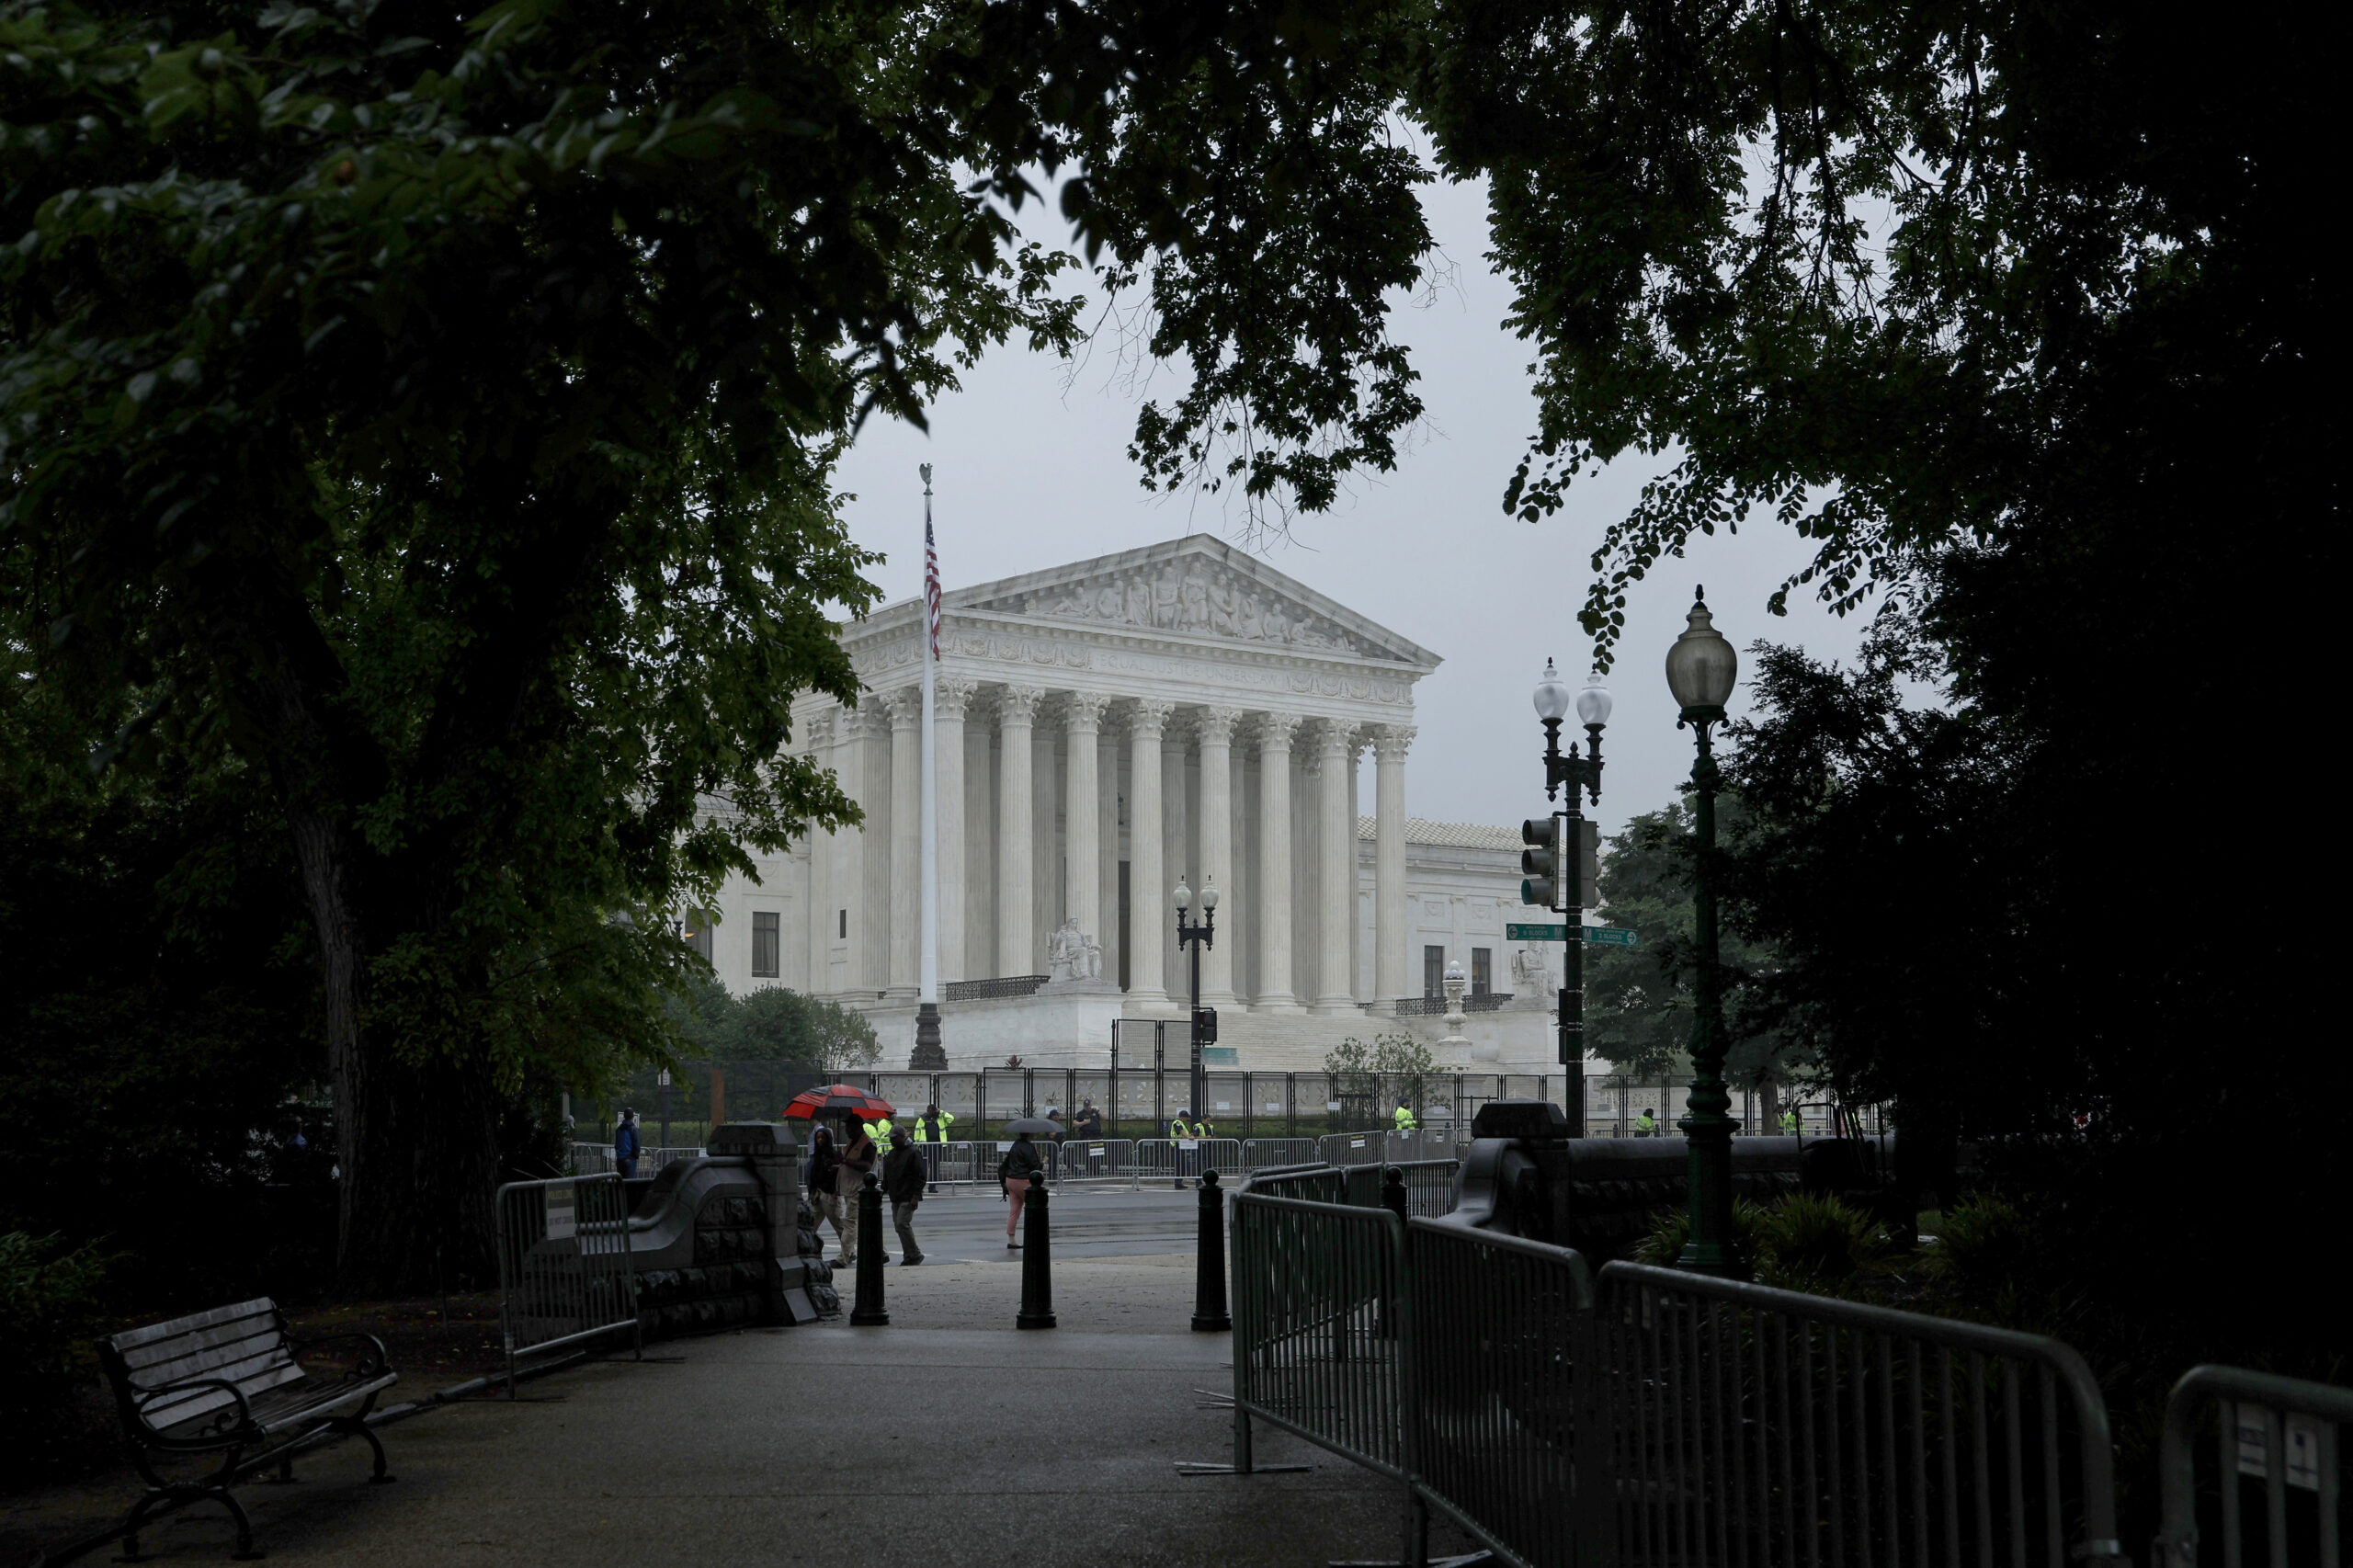 A view of the U.S. Supreme Court Building on June 23, 2022 in Washington, DC. | Anna Moneymaker/Getty Images